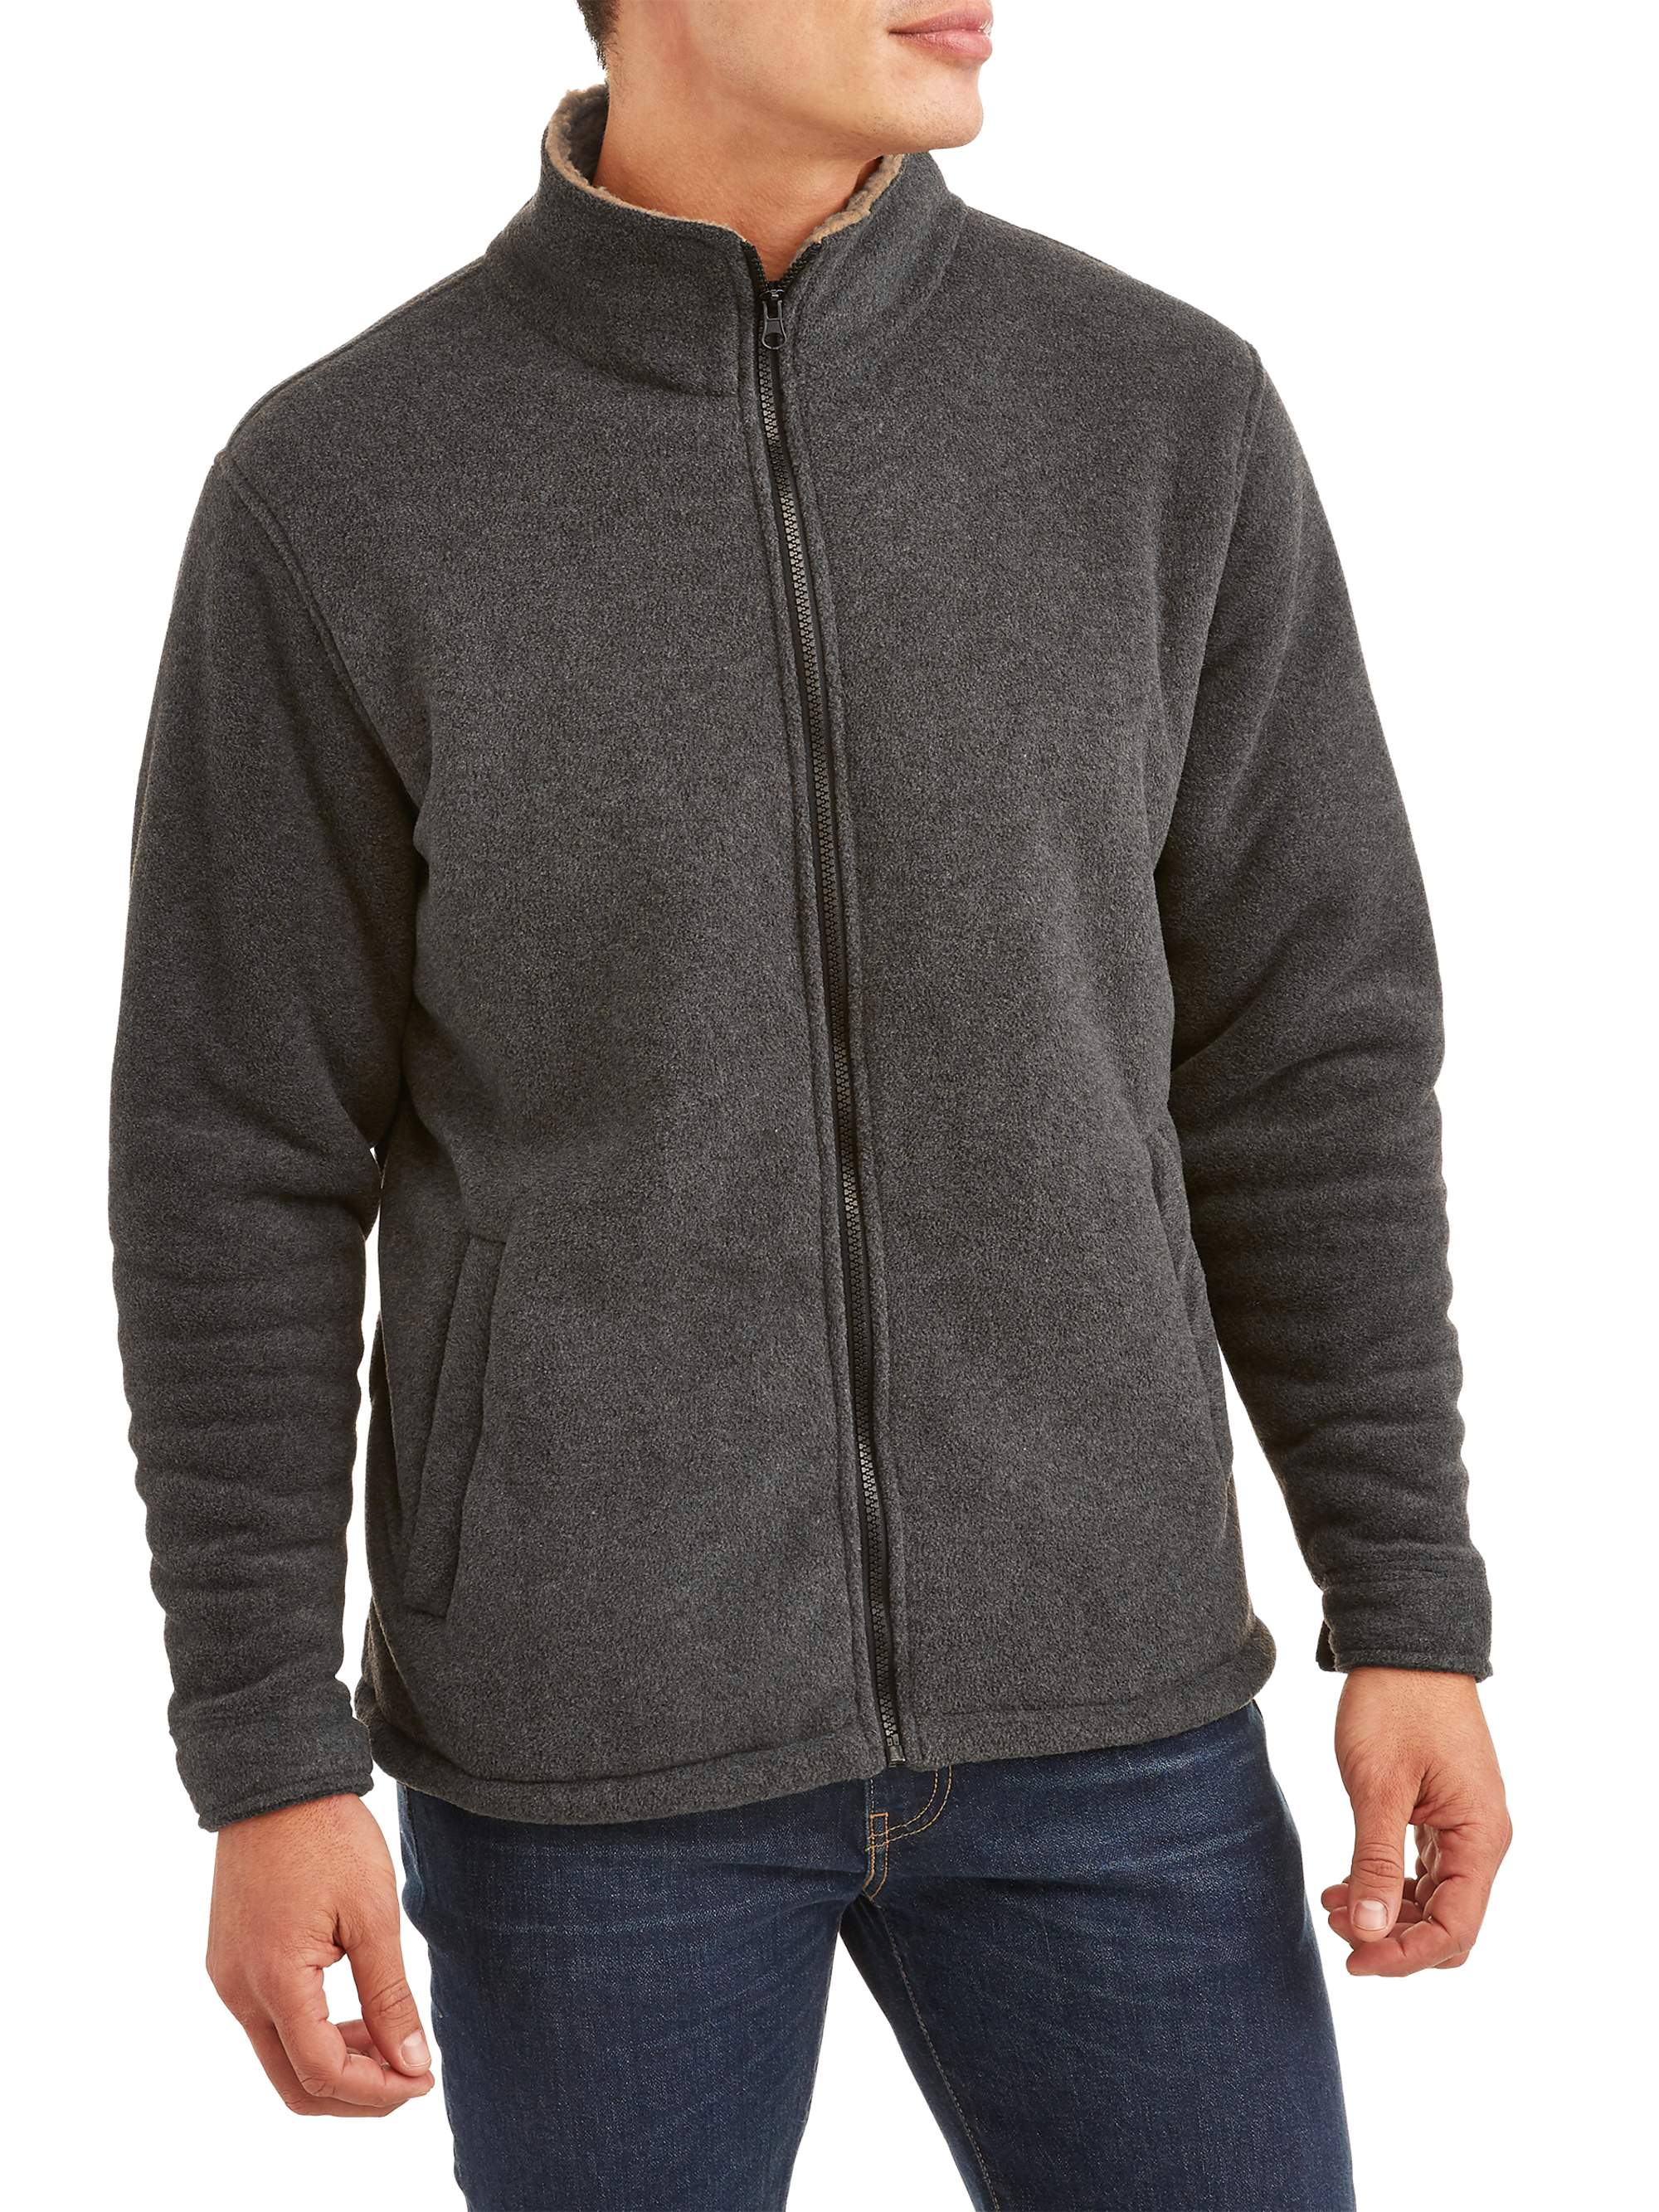 Climate Concepts Men's Heavy Weight Full Zip Artic Fleece Jacket with Sherpa Lining, up to Size 5Xl - image 1 of 4